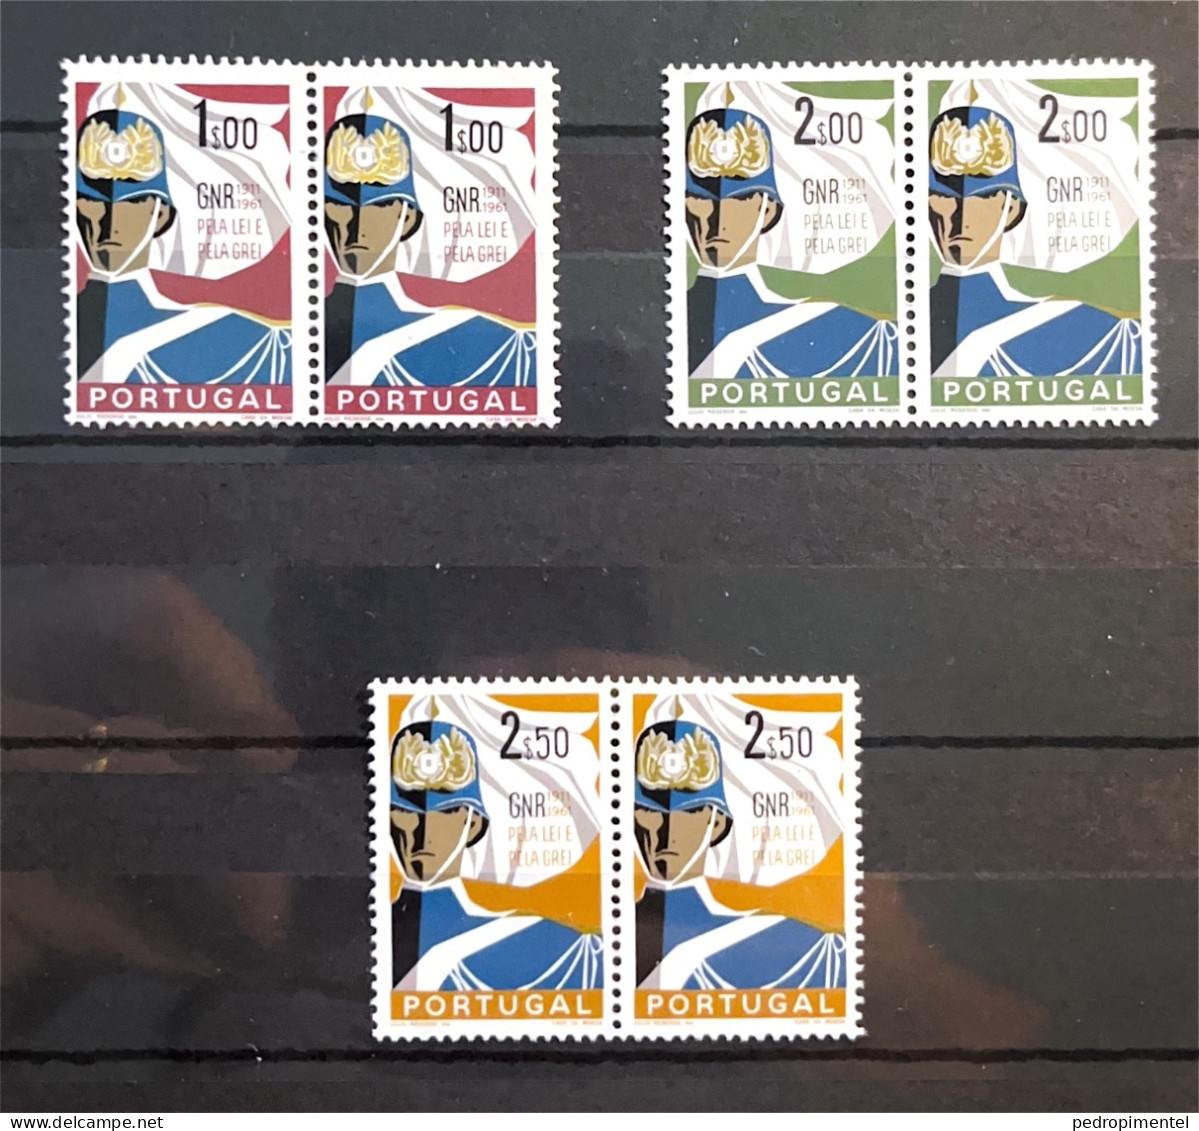 Portugal 1962 "National Republican Guard" Condition MNH #883-885 (pair) - Unused Stamps